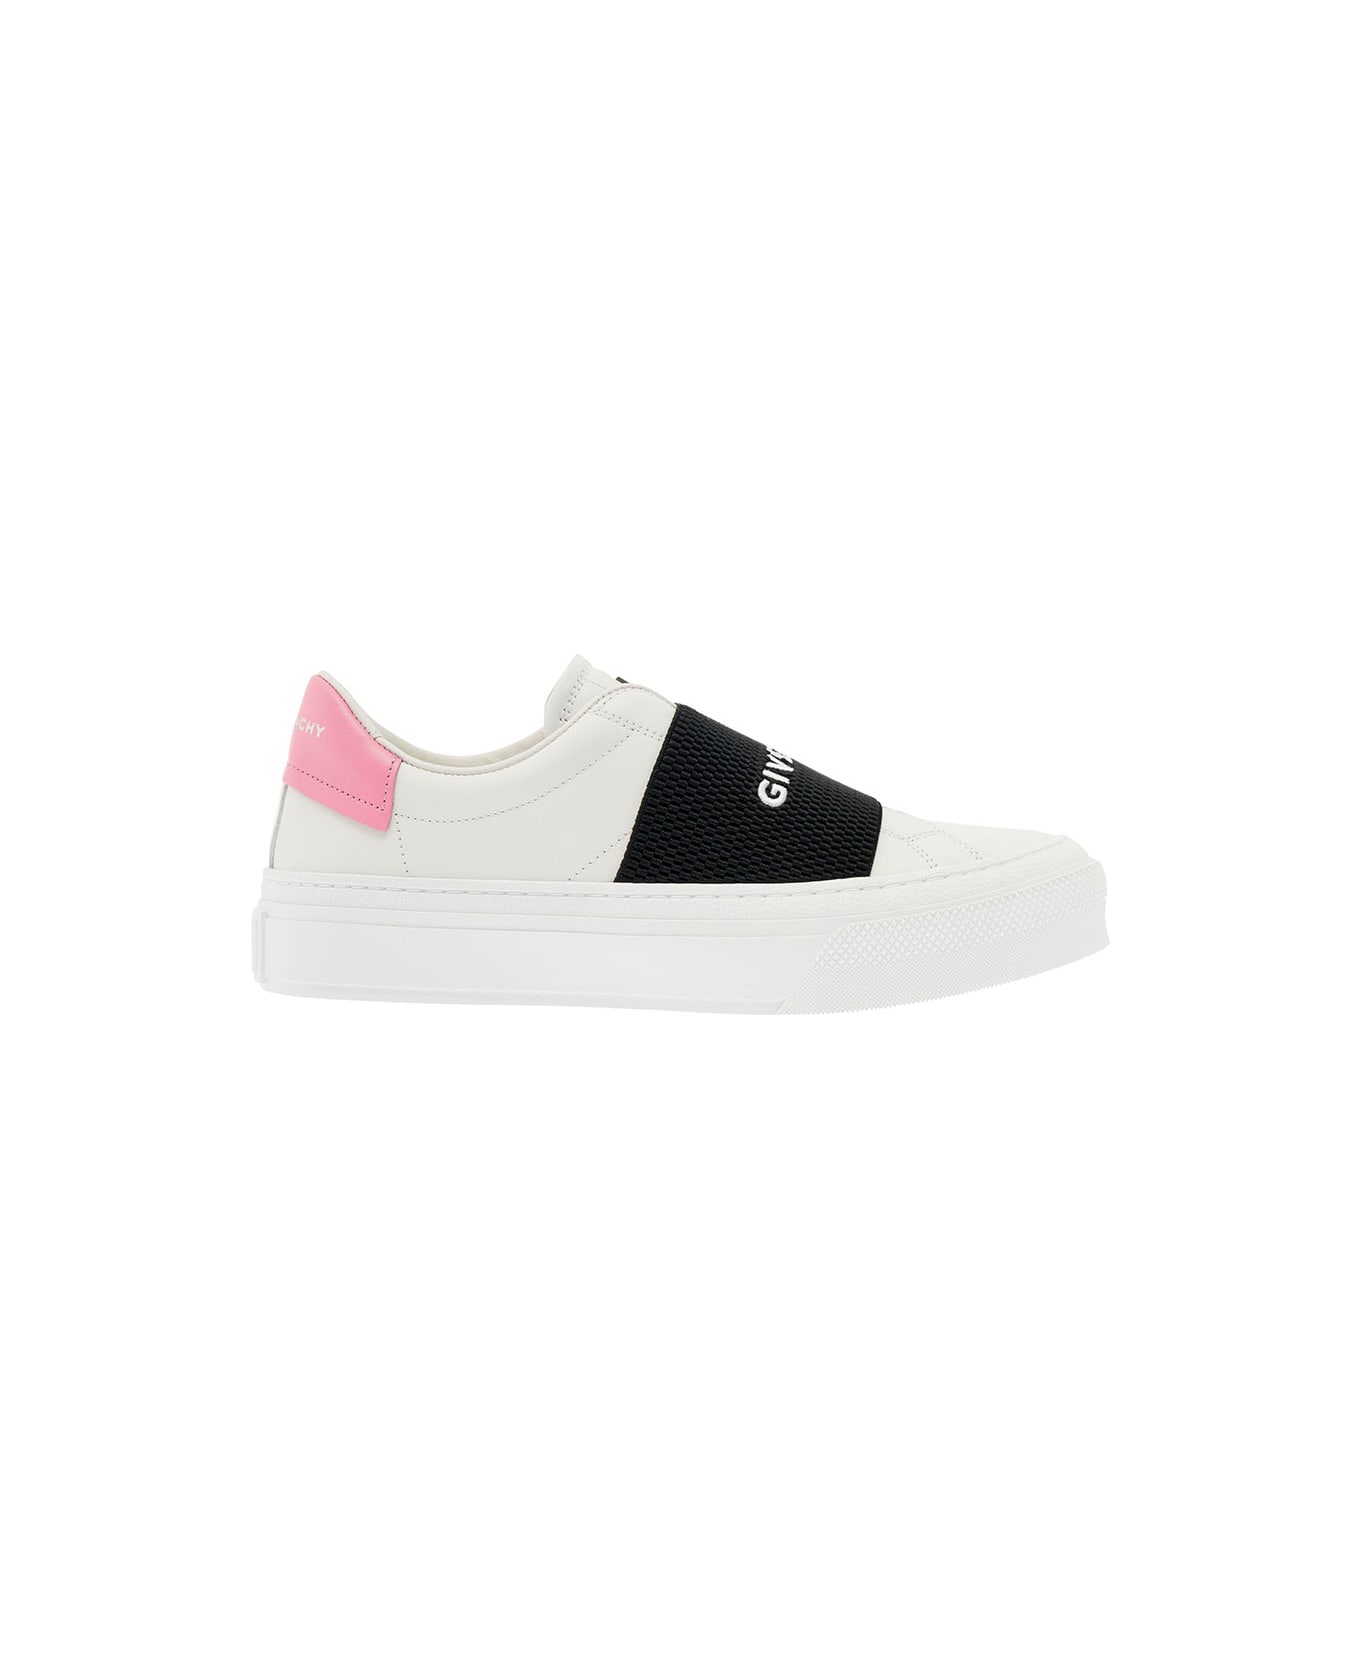 Givenchy Sneakers In White Leather - White Black Pink スニーカー